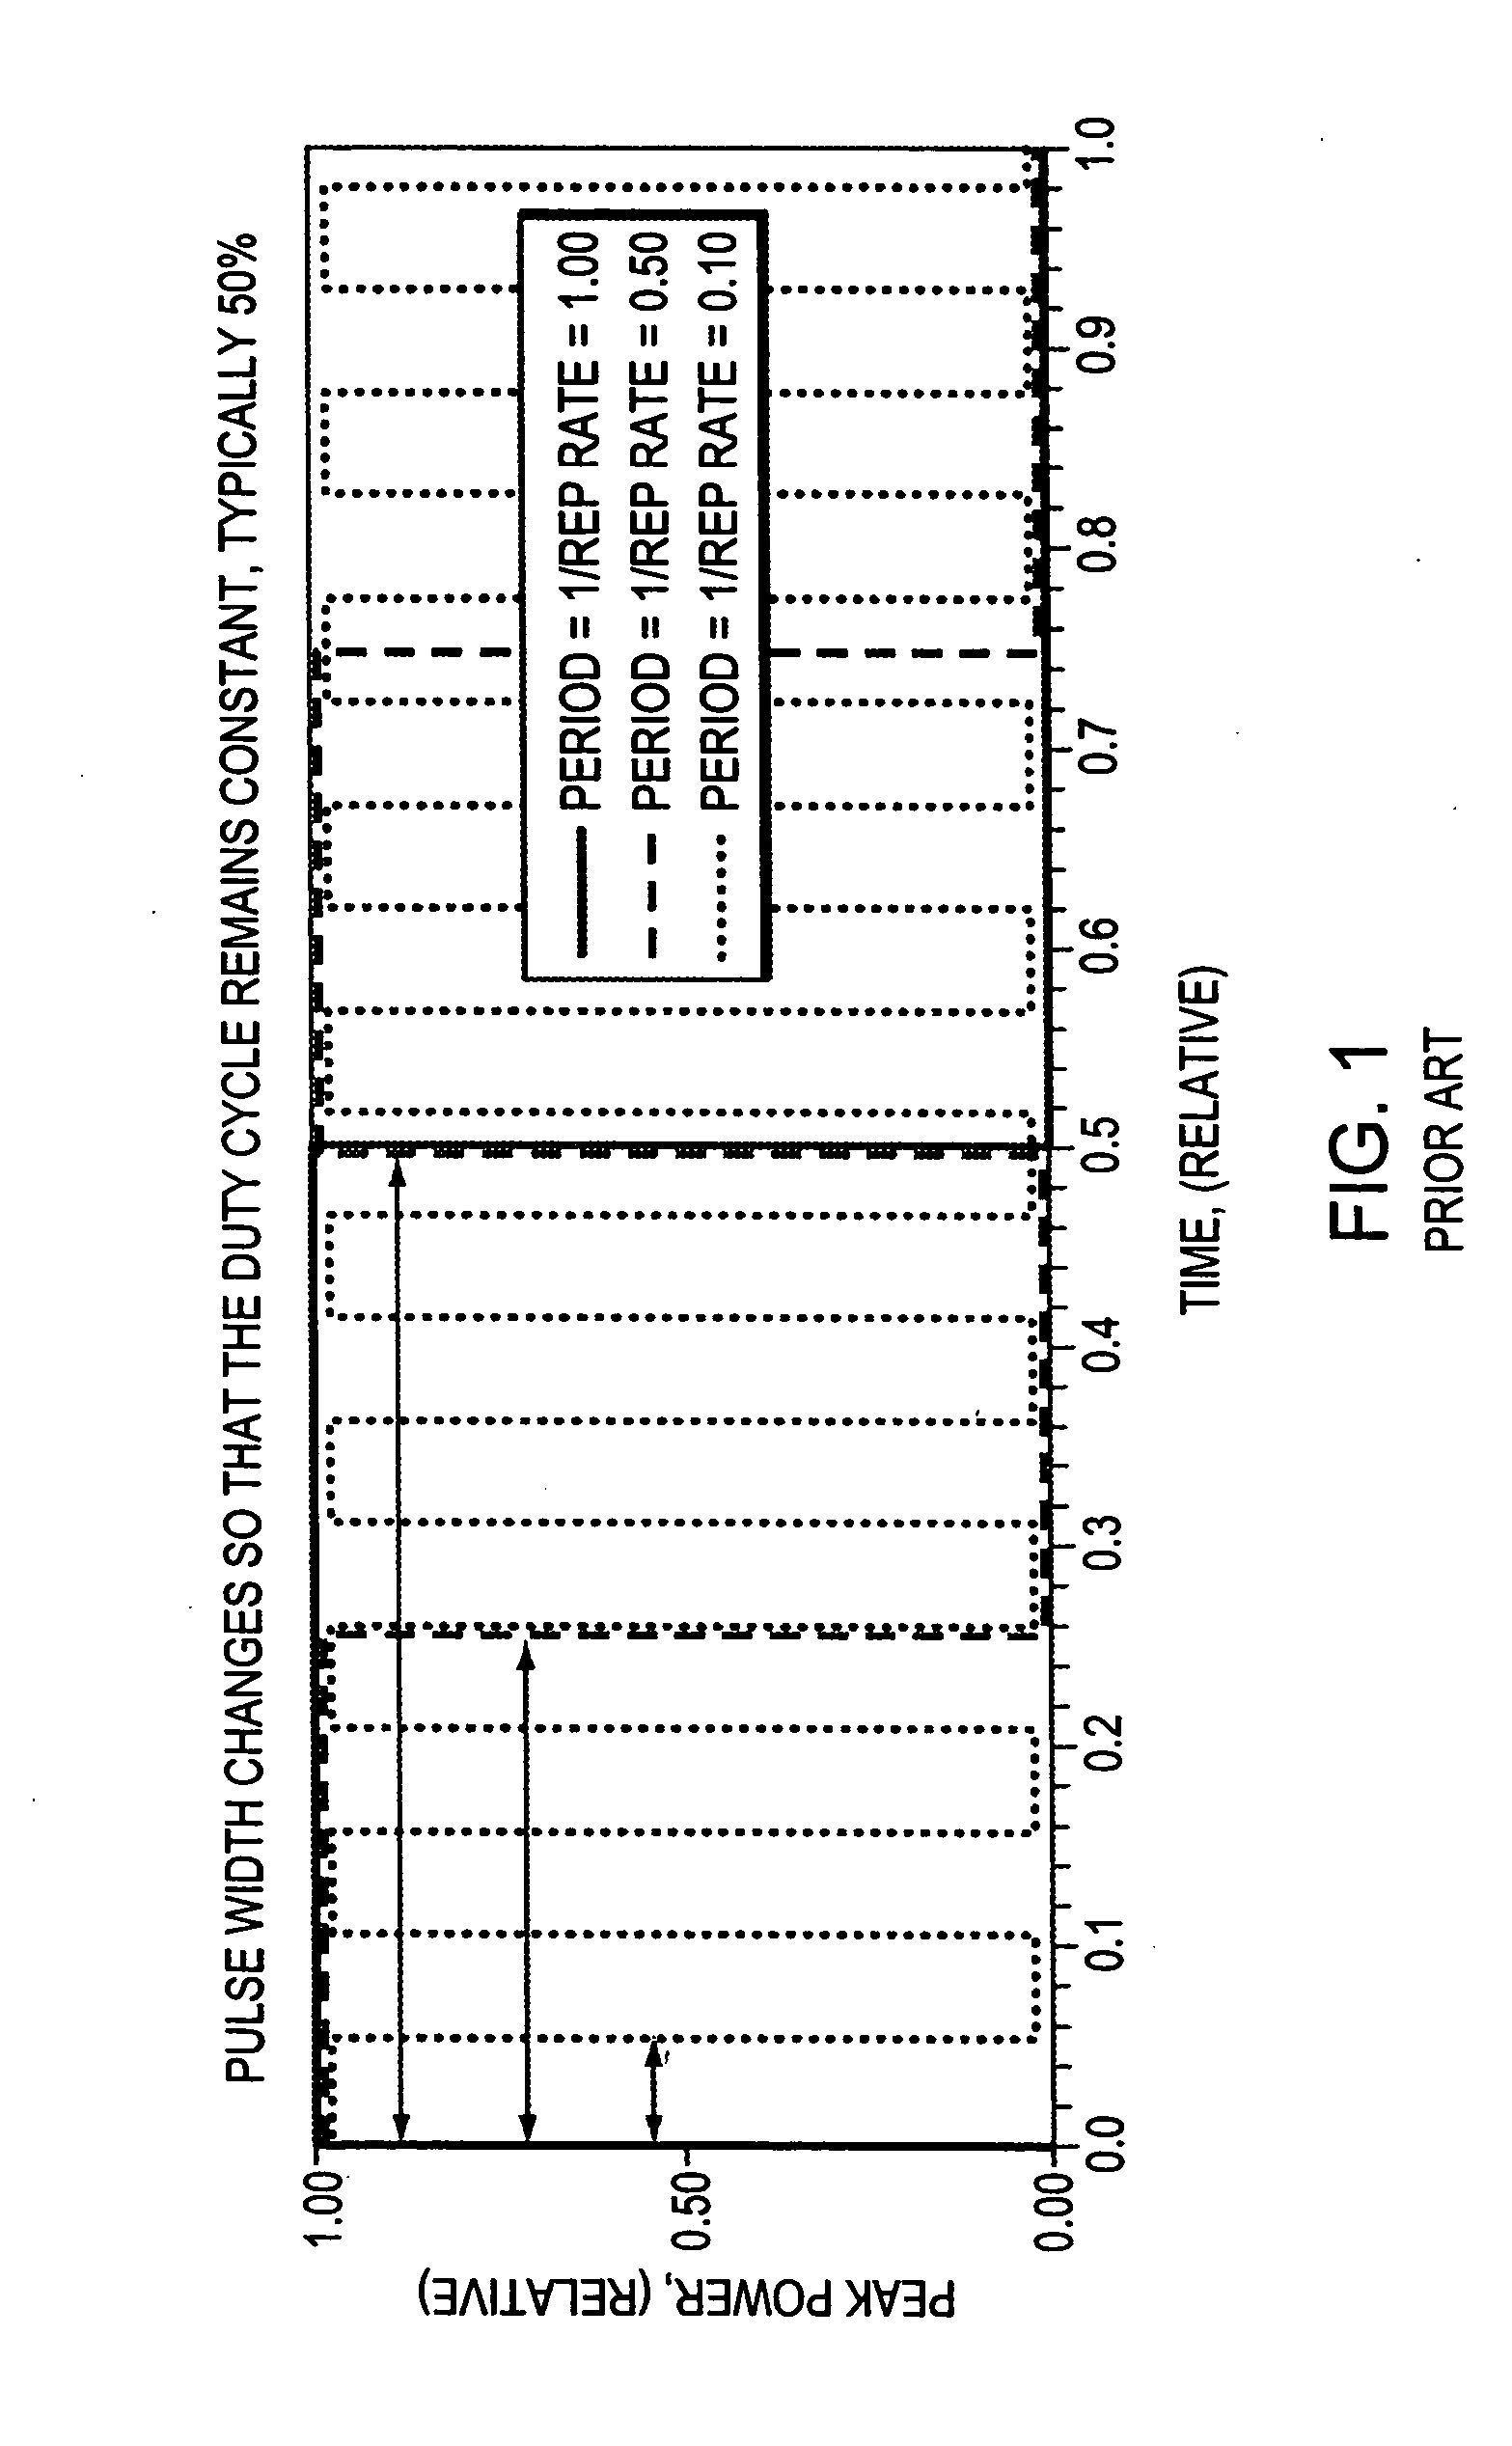 Variable-rate communication system with optimal filtering